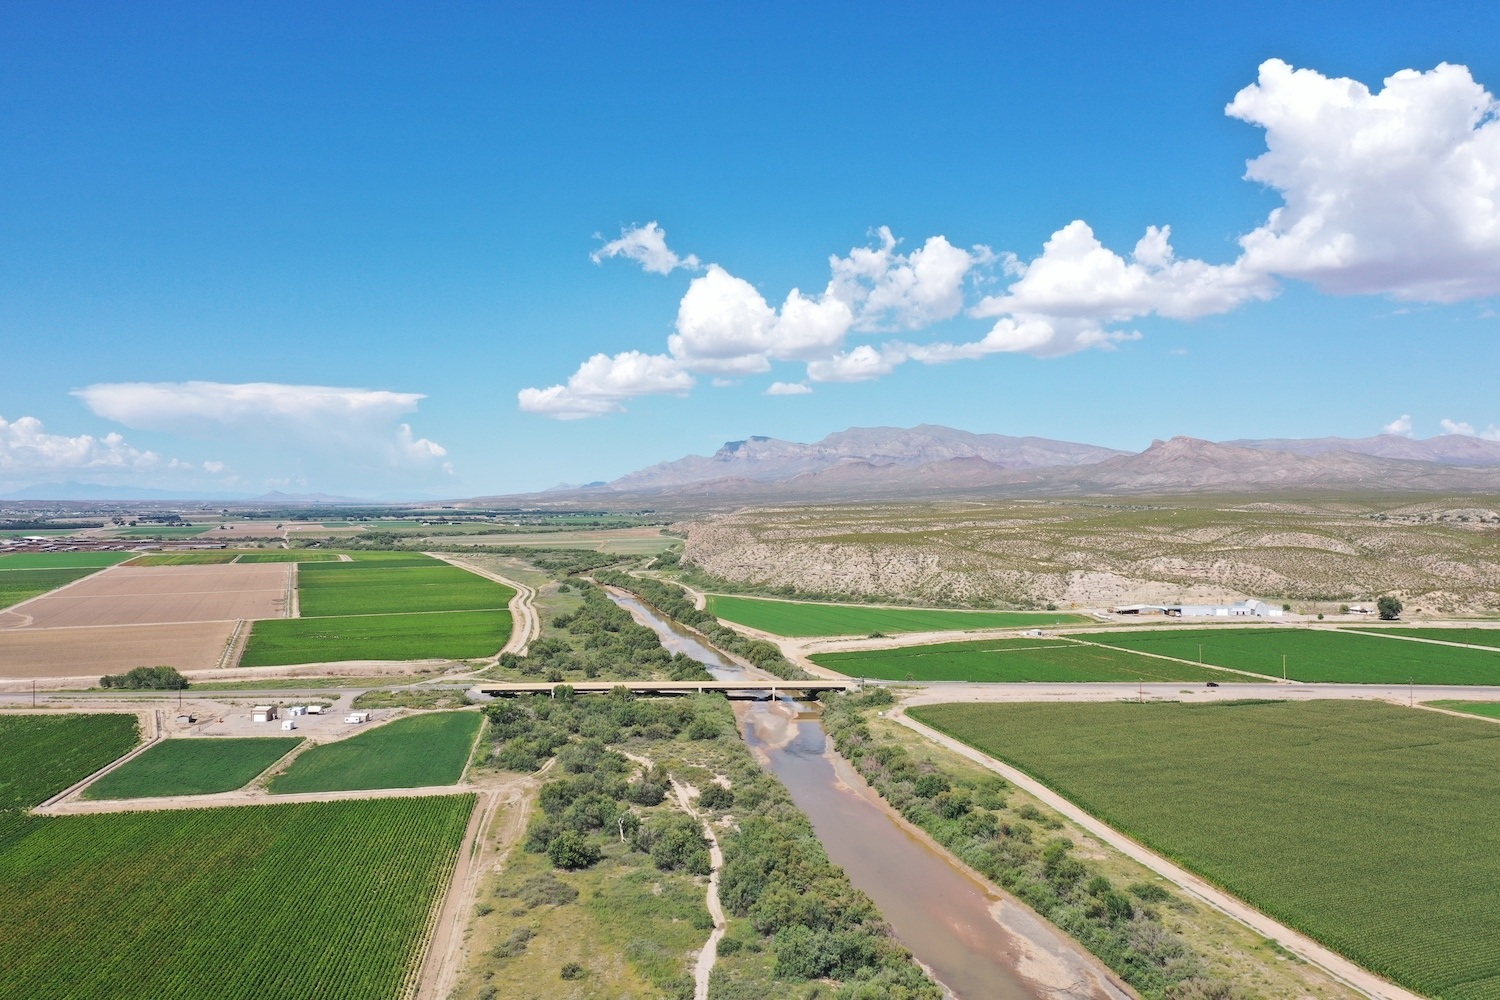 The Rio Grande flows between chile fields around Hatch, New Mexico. Jessie Moreno's father used to irrigate his chile fields with water from the river all growing season, but now Moreno must pump groundwater to irrigate, which is costly.